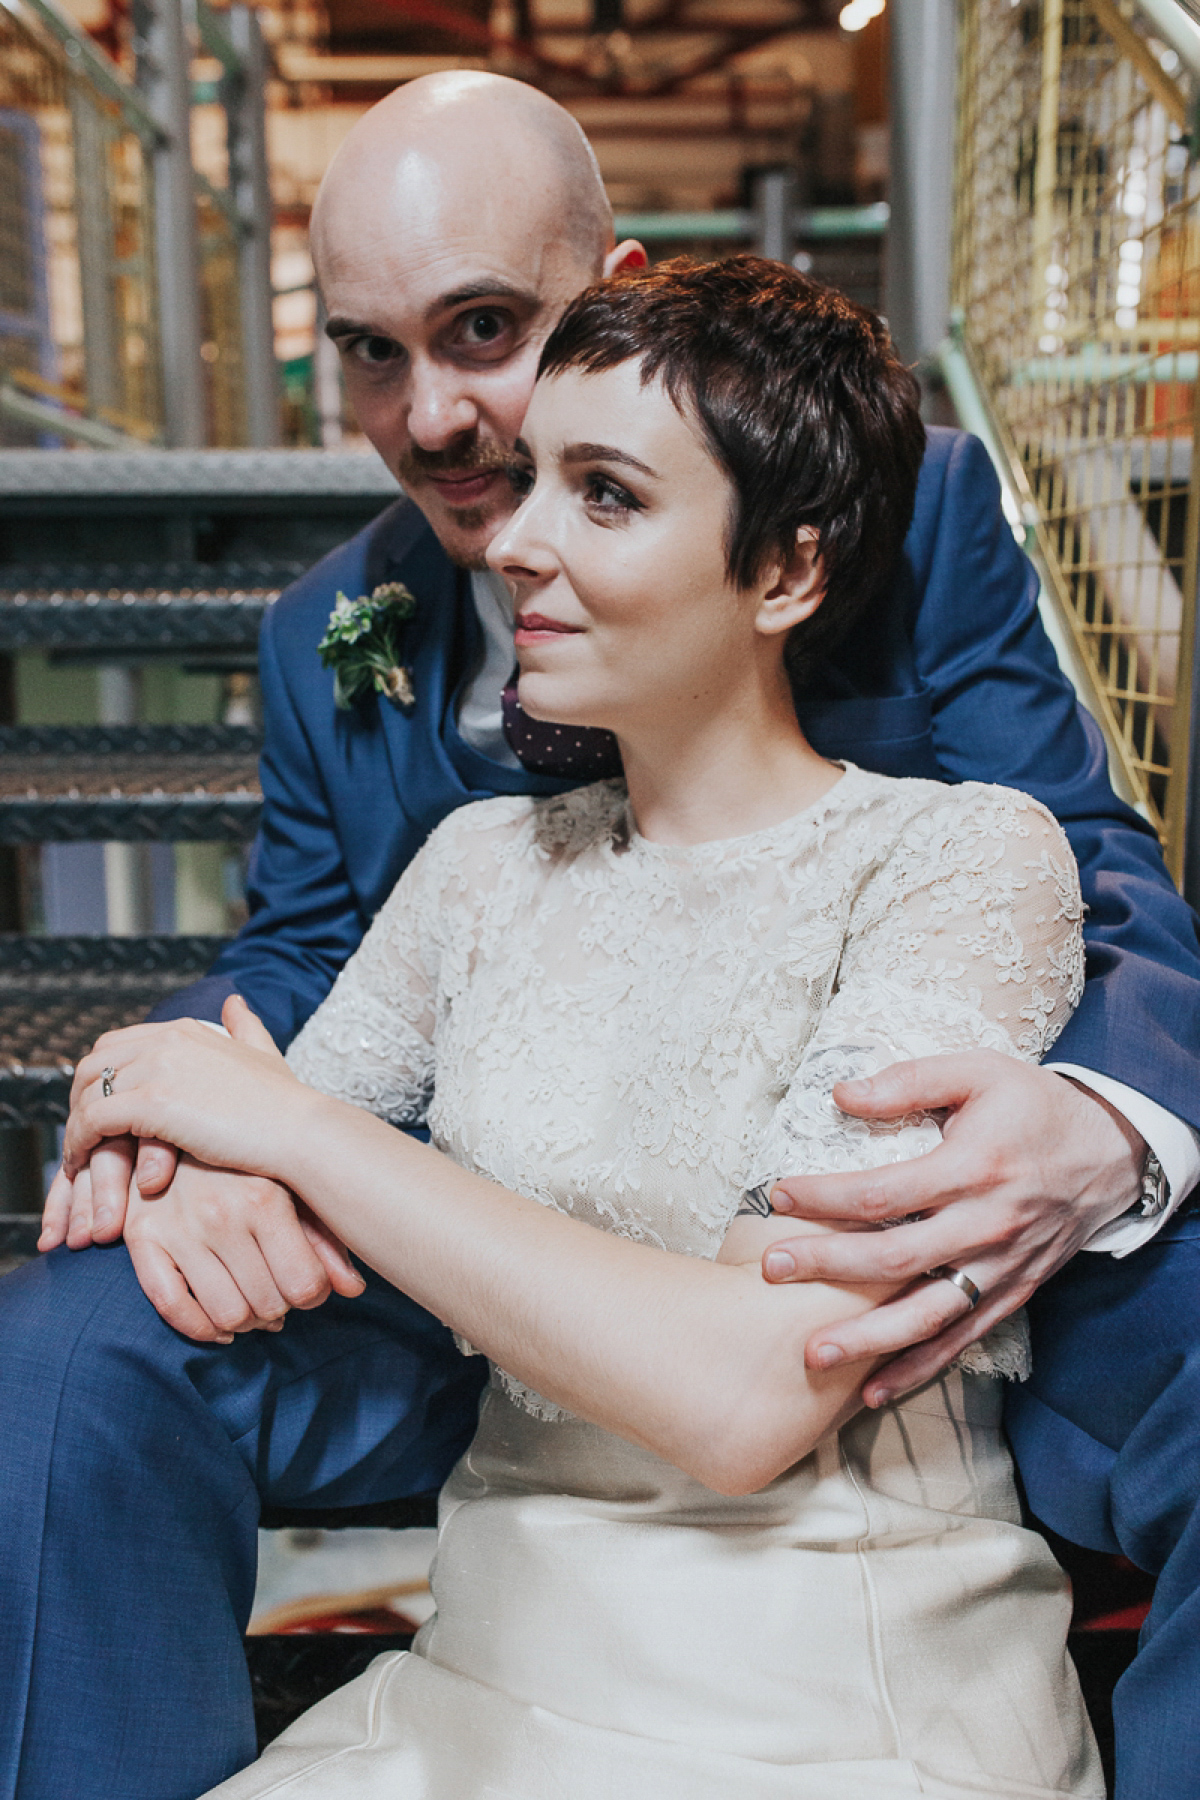 A short wedding dress and birdcage veil for a 1960's inspired bride. Image by Indie Photography.